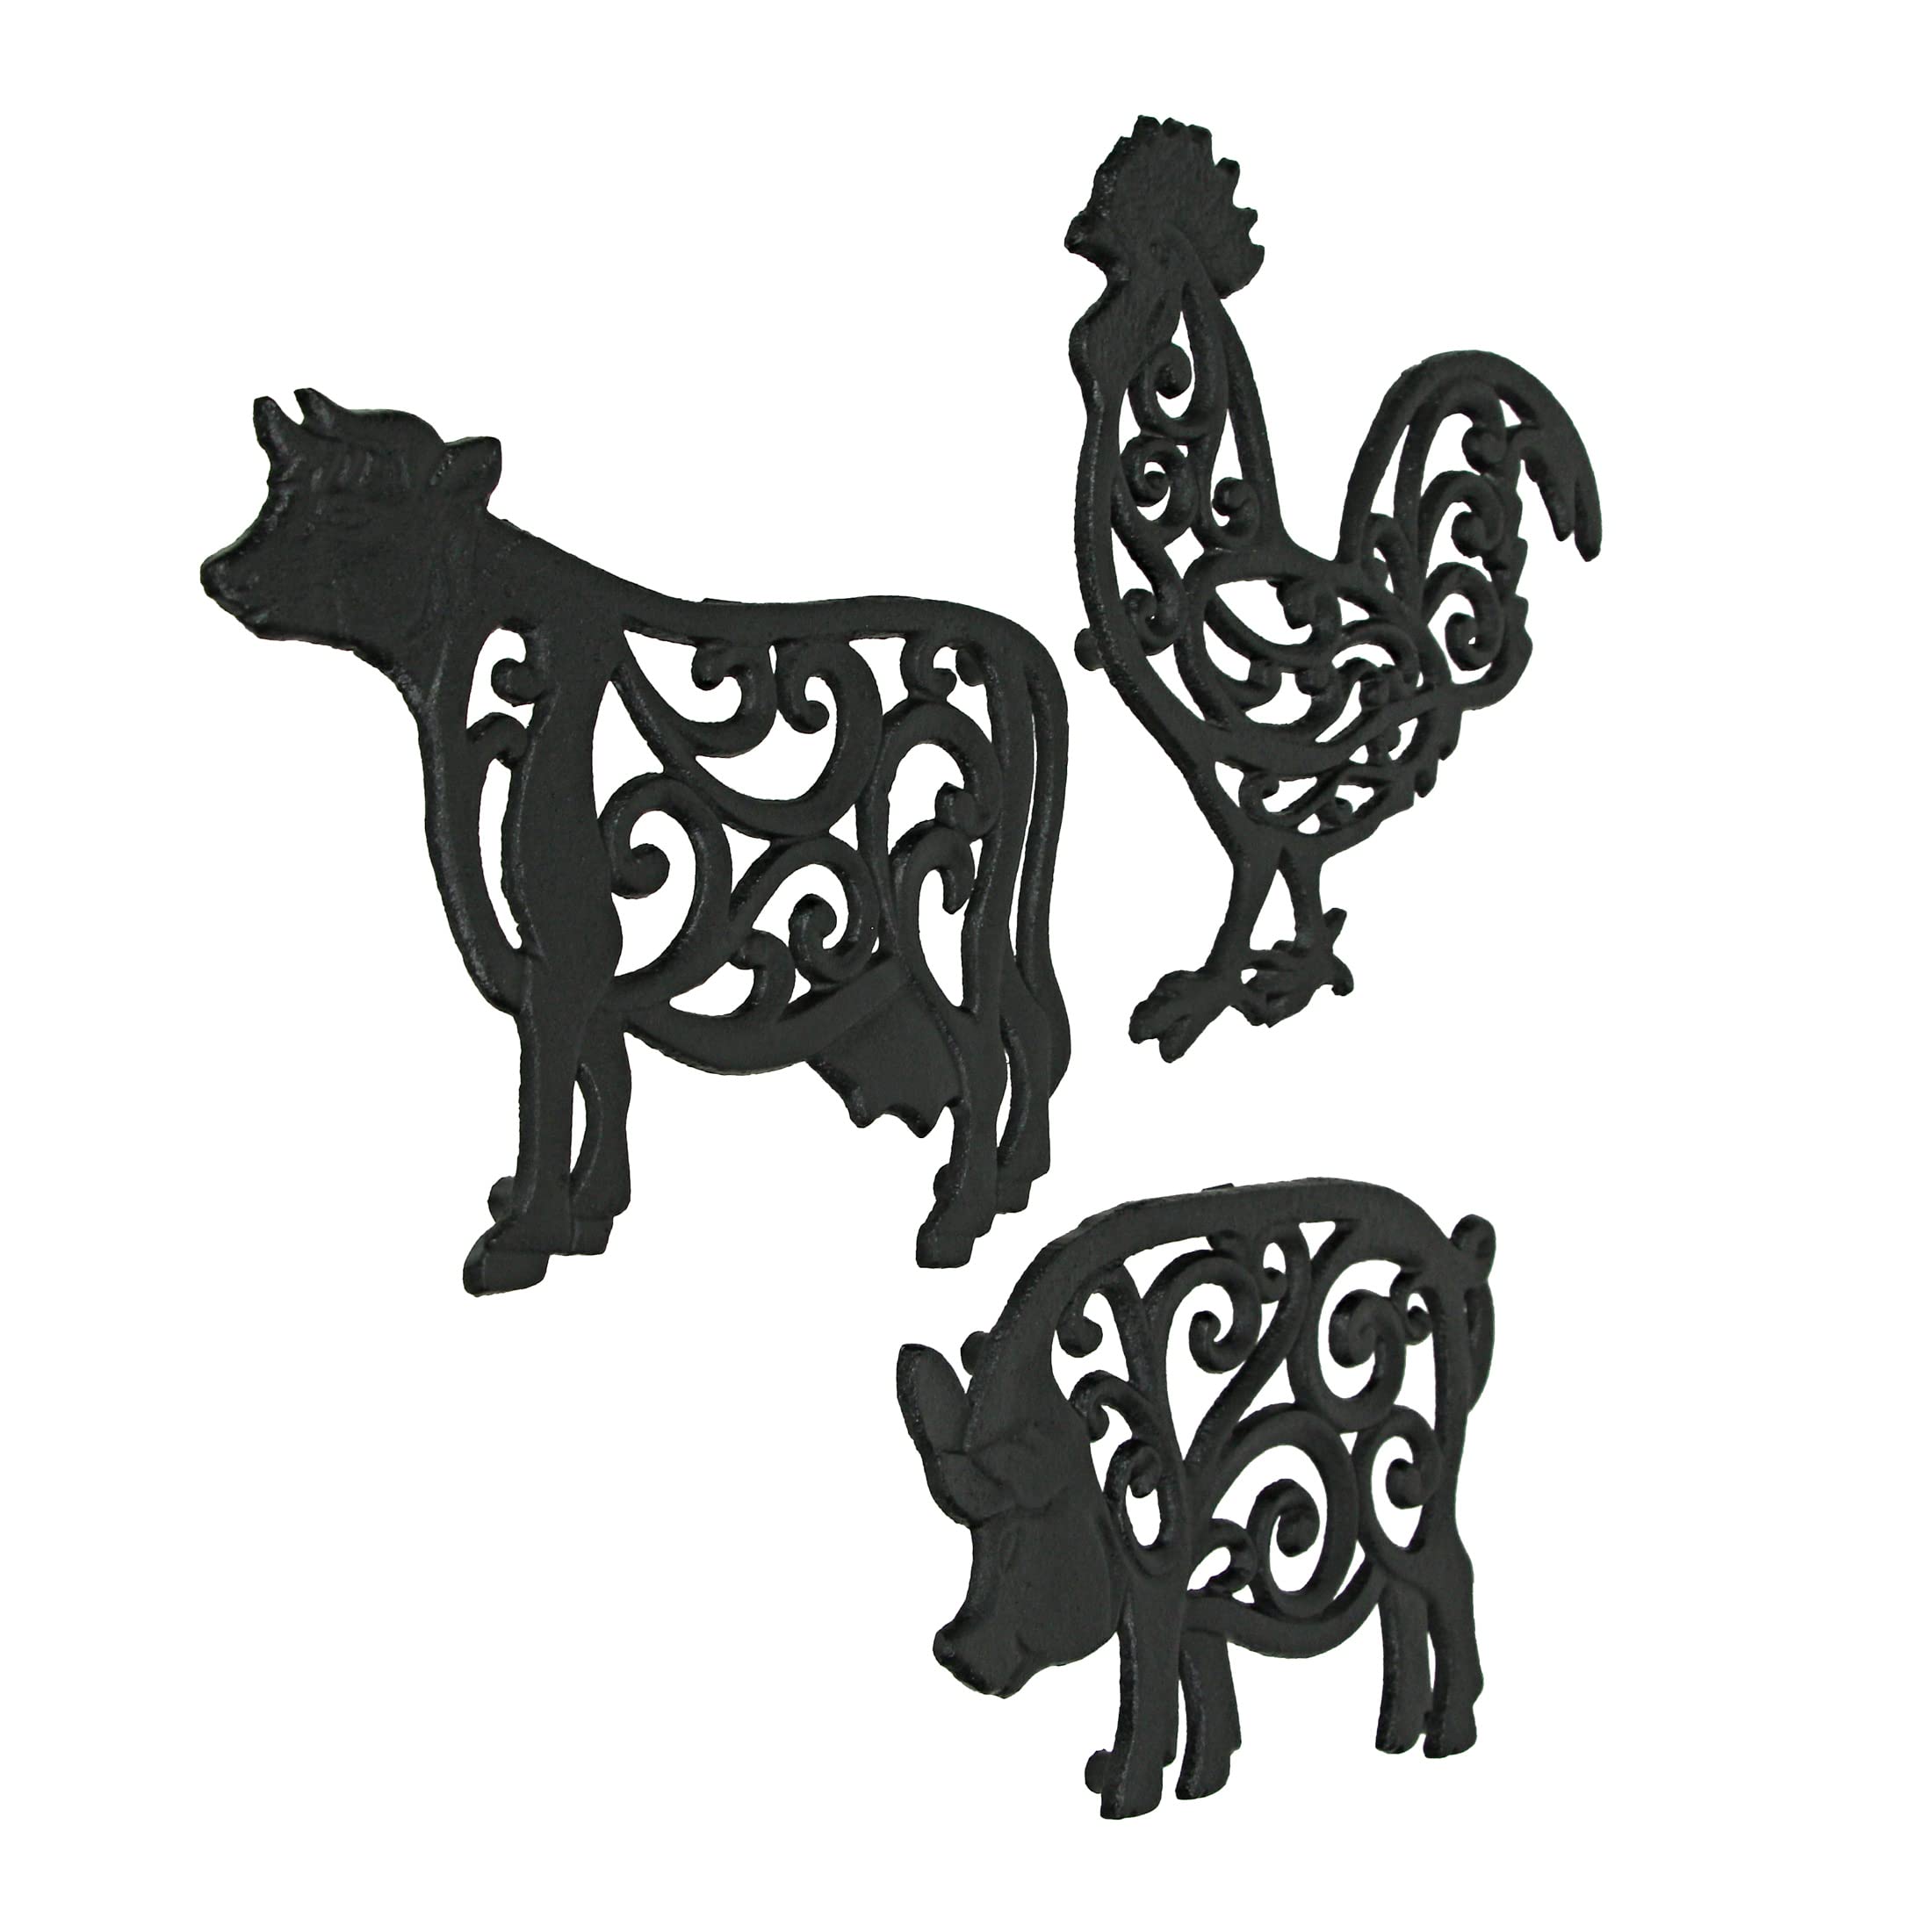 Set of 3 Black Cast Iron Farm Animal Kitchen Décor Trivets Rooster Pig and Cow Decorative Wall Hanging Art 9 Inches Long Farmhouse Style Table Accents